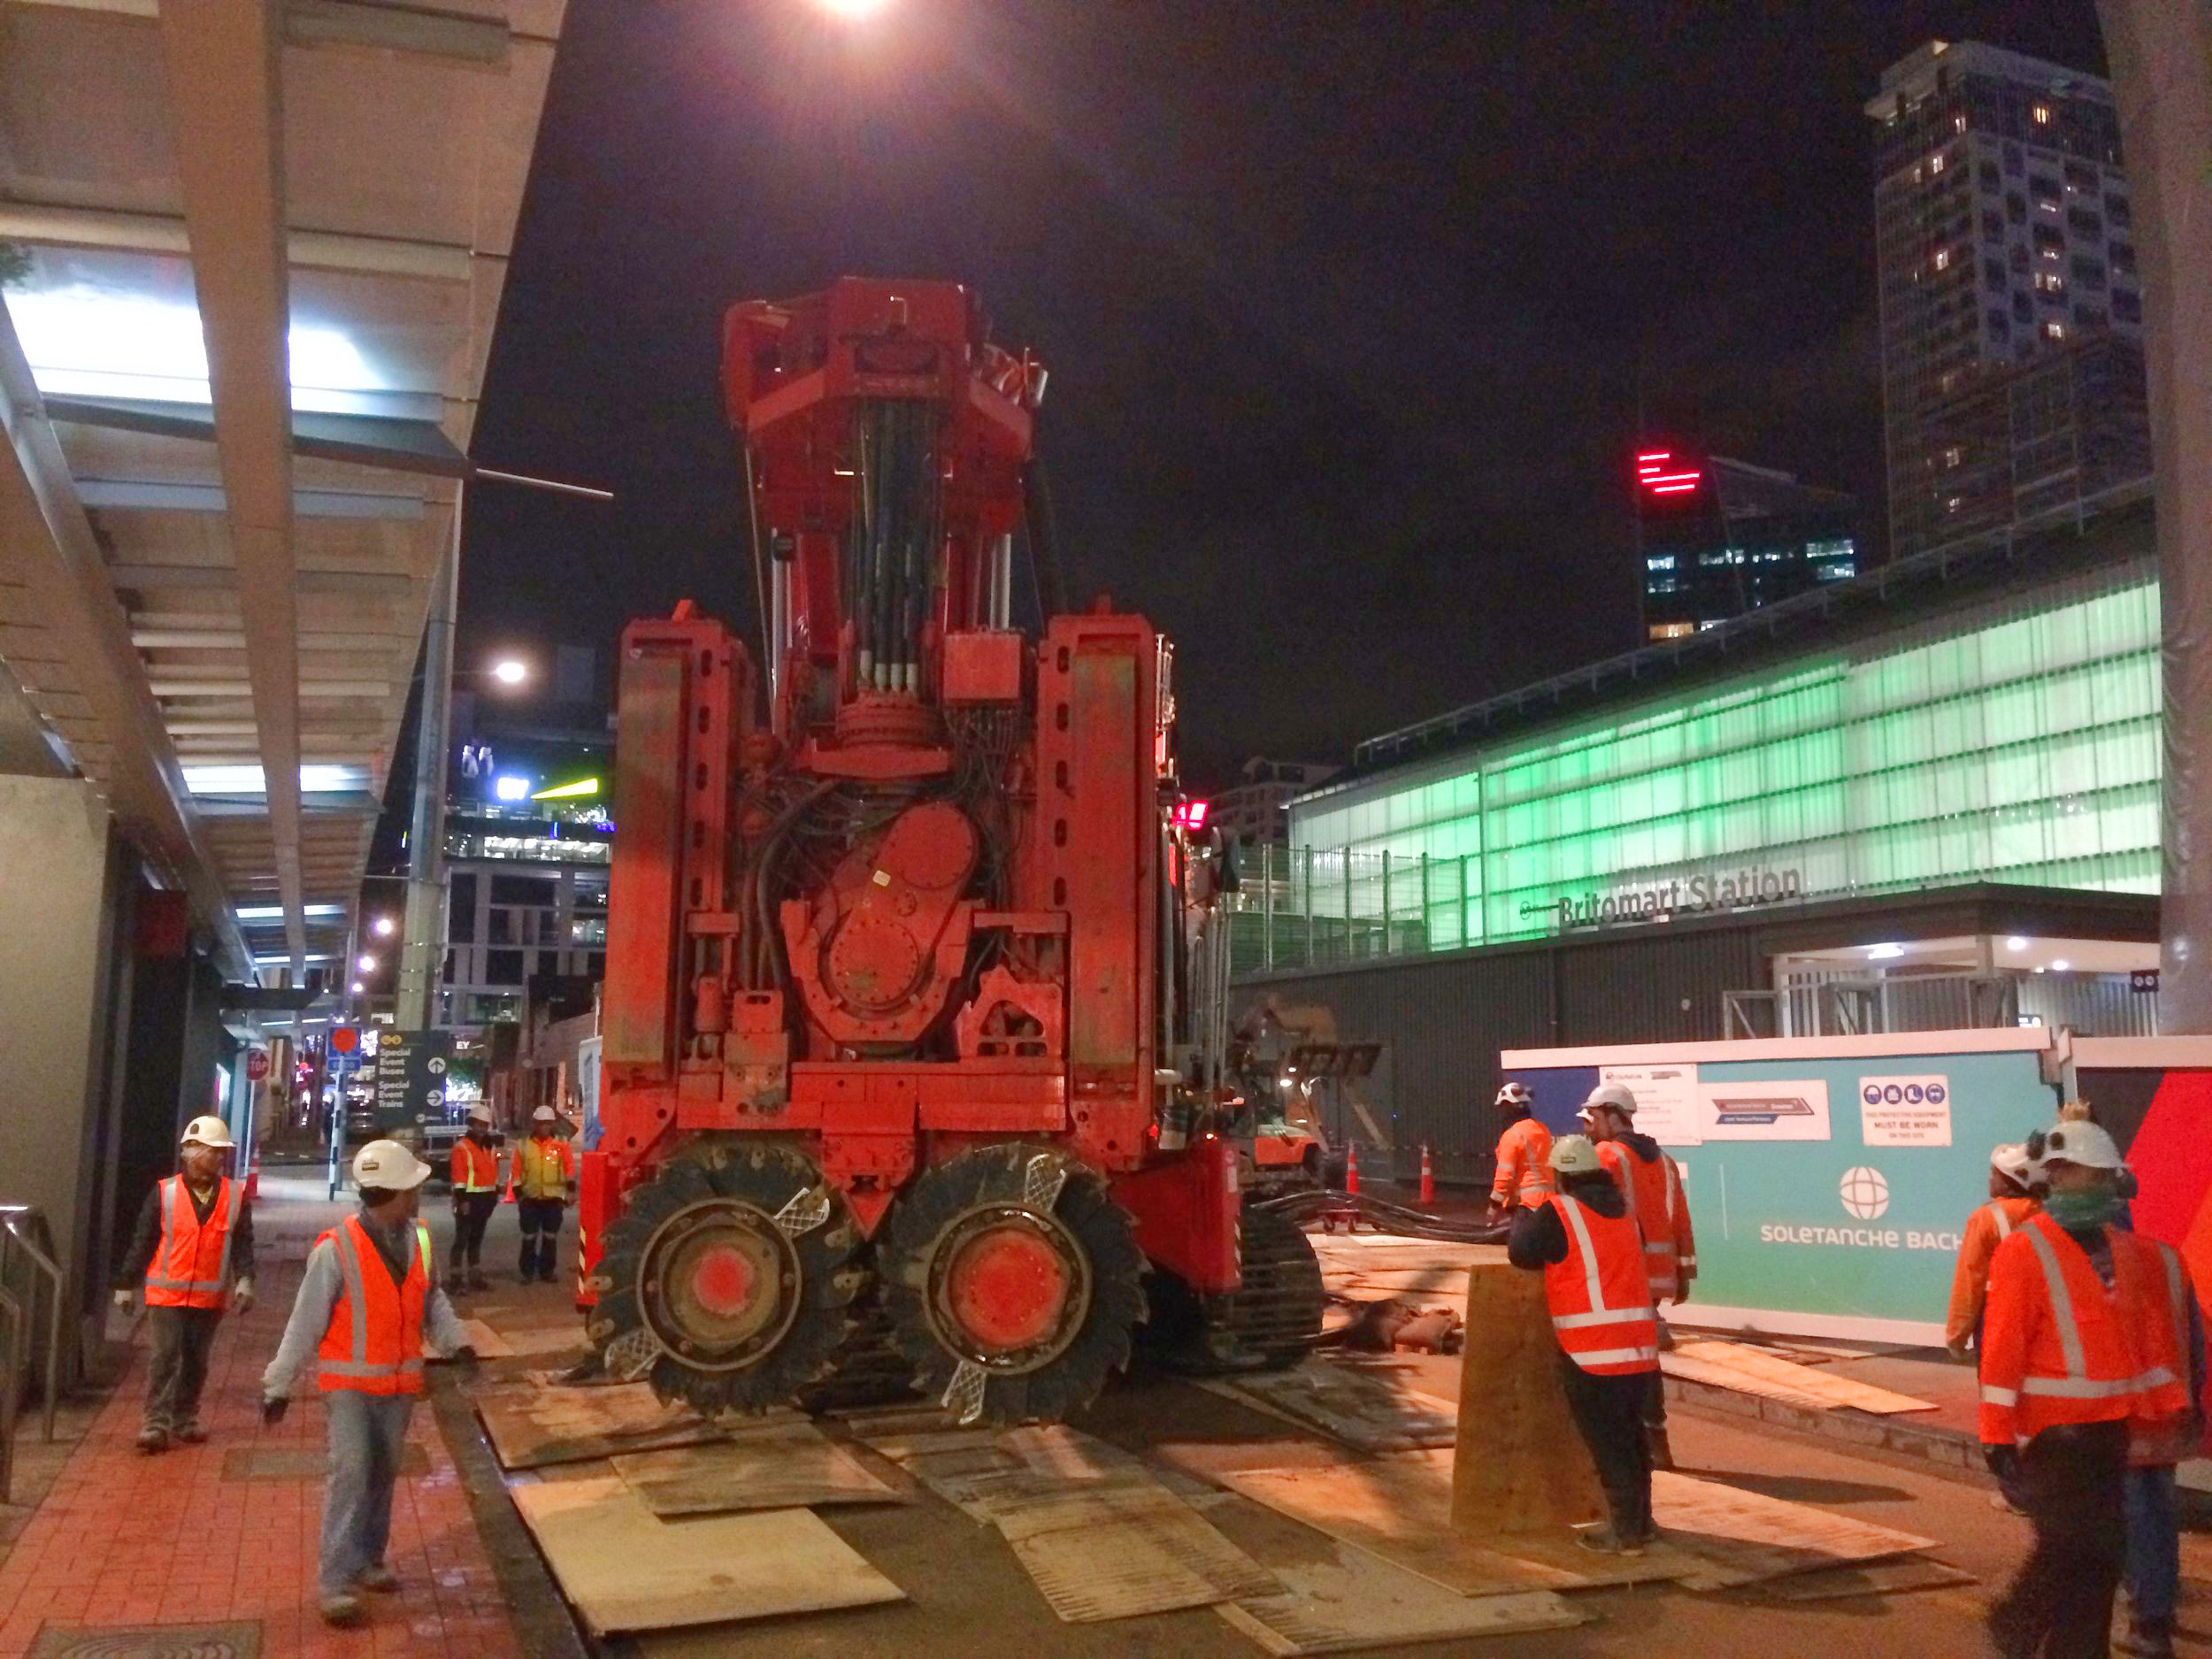  This bright red 90 tonne piling rig named Sandrine worked inside and outside the historic Chief Post Office (Britomart Transport Centre) building until being returned to France in early 2018. This is Sandrine being brought inside the building August